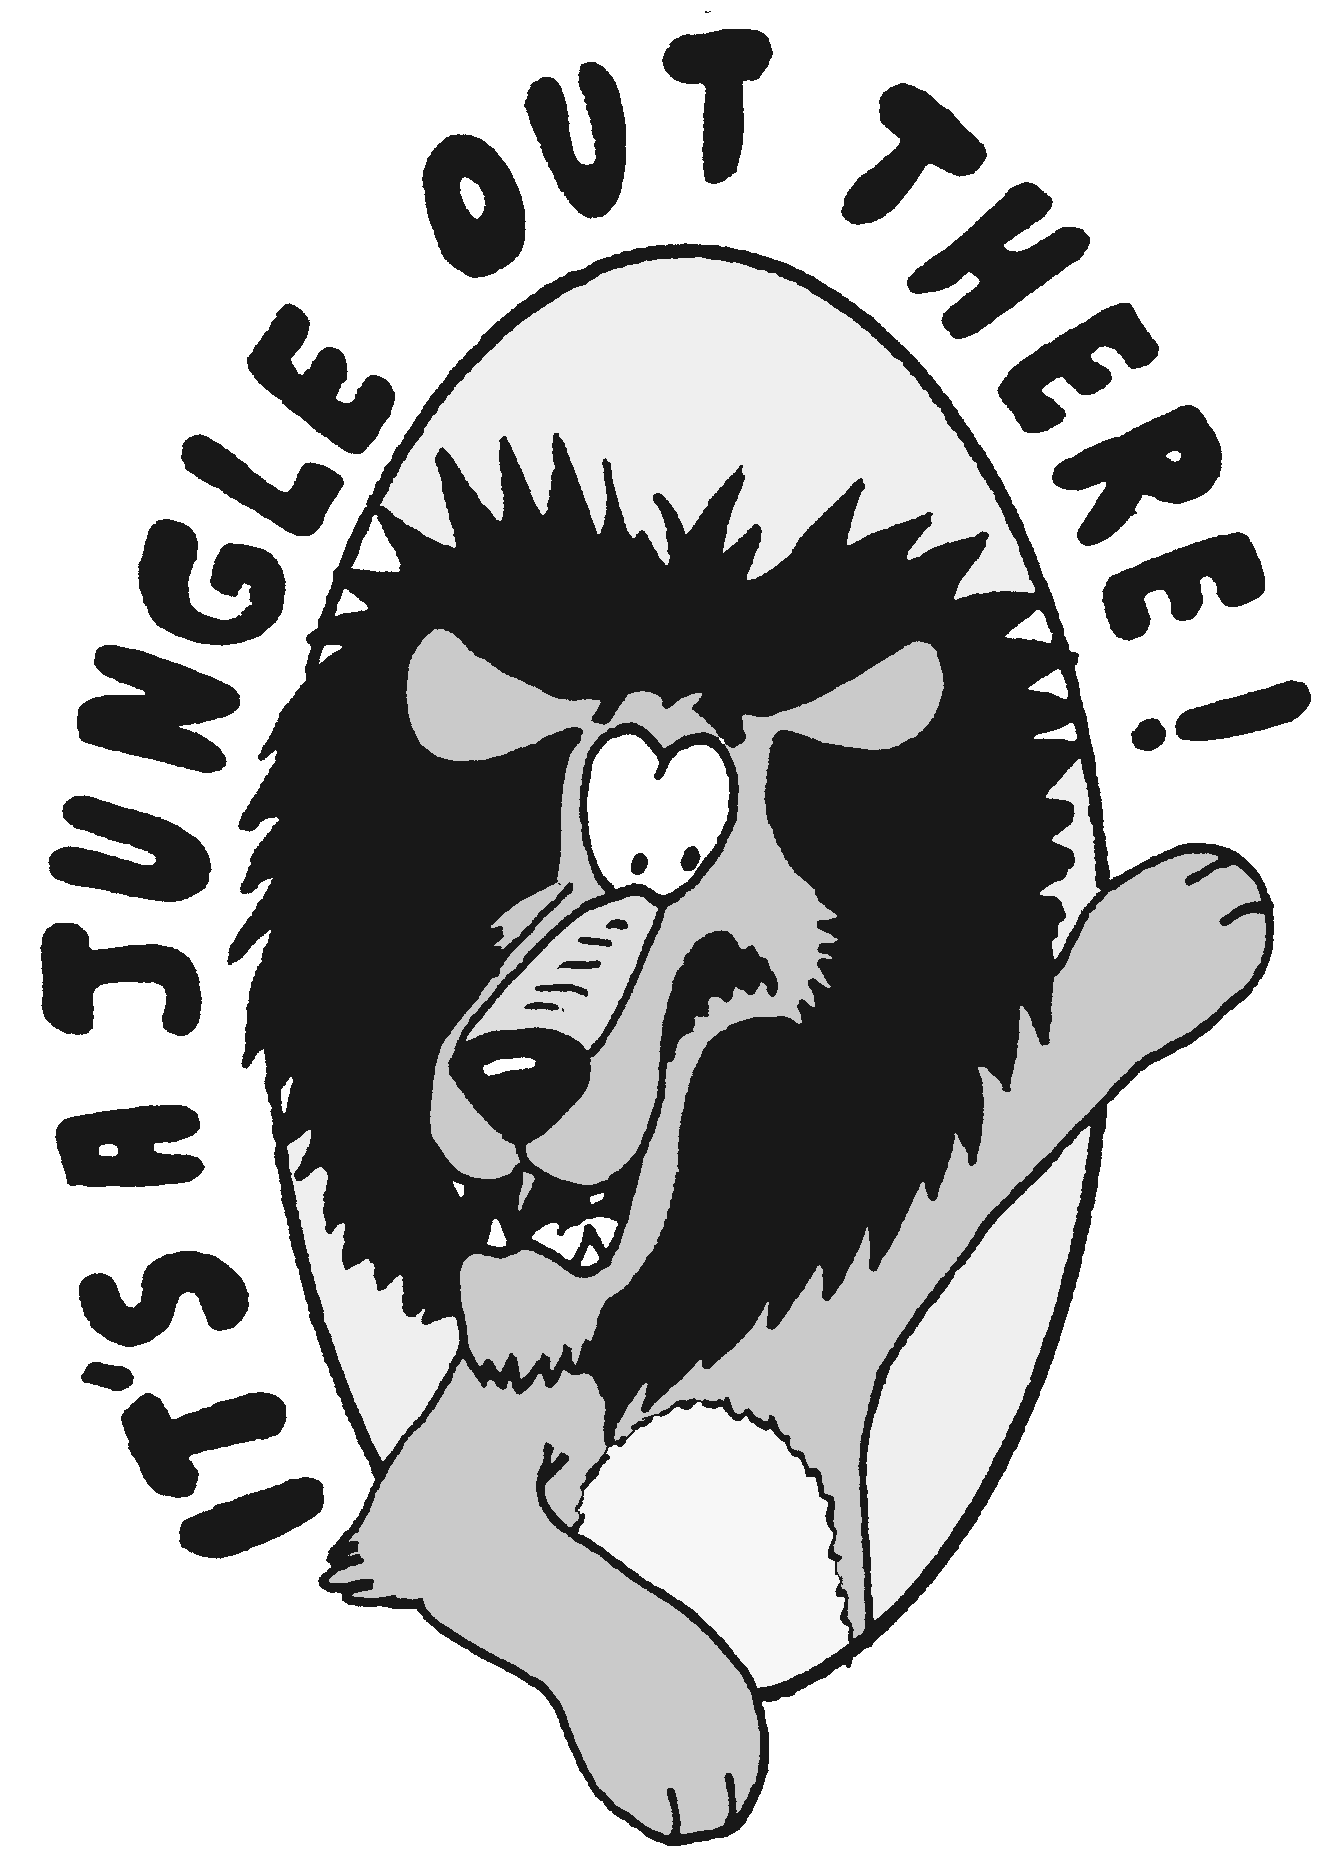 Logo: "It's a Jungle out there!"